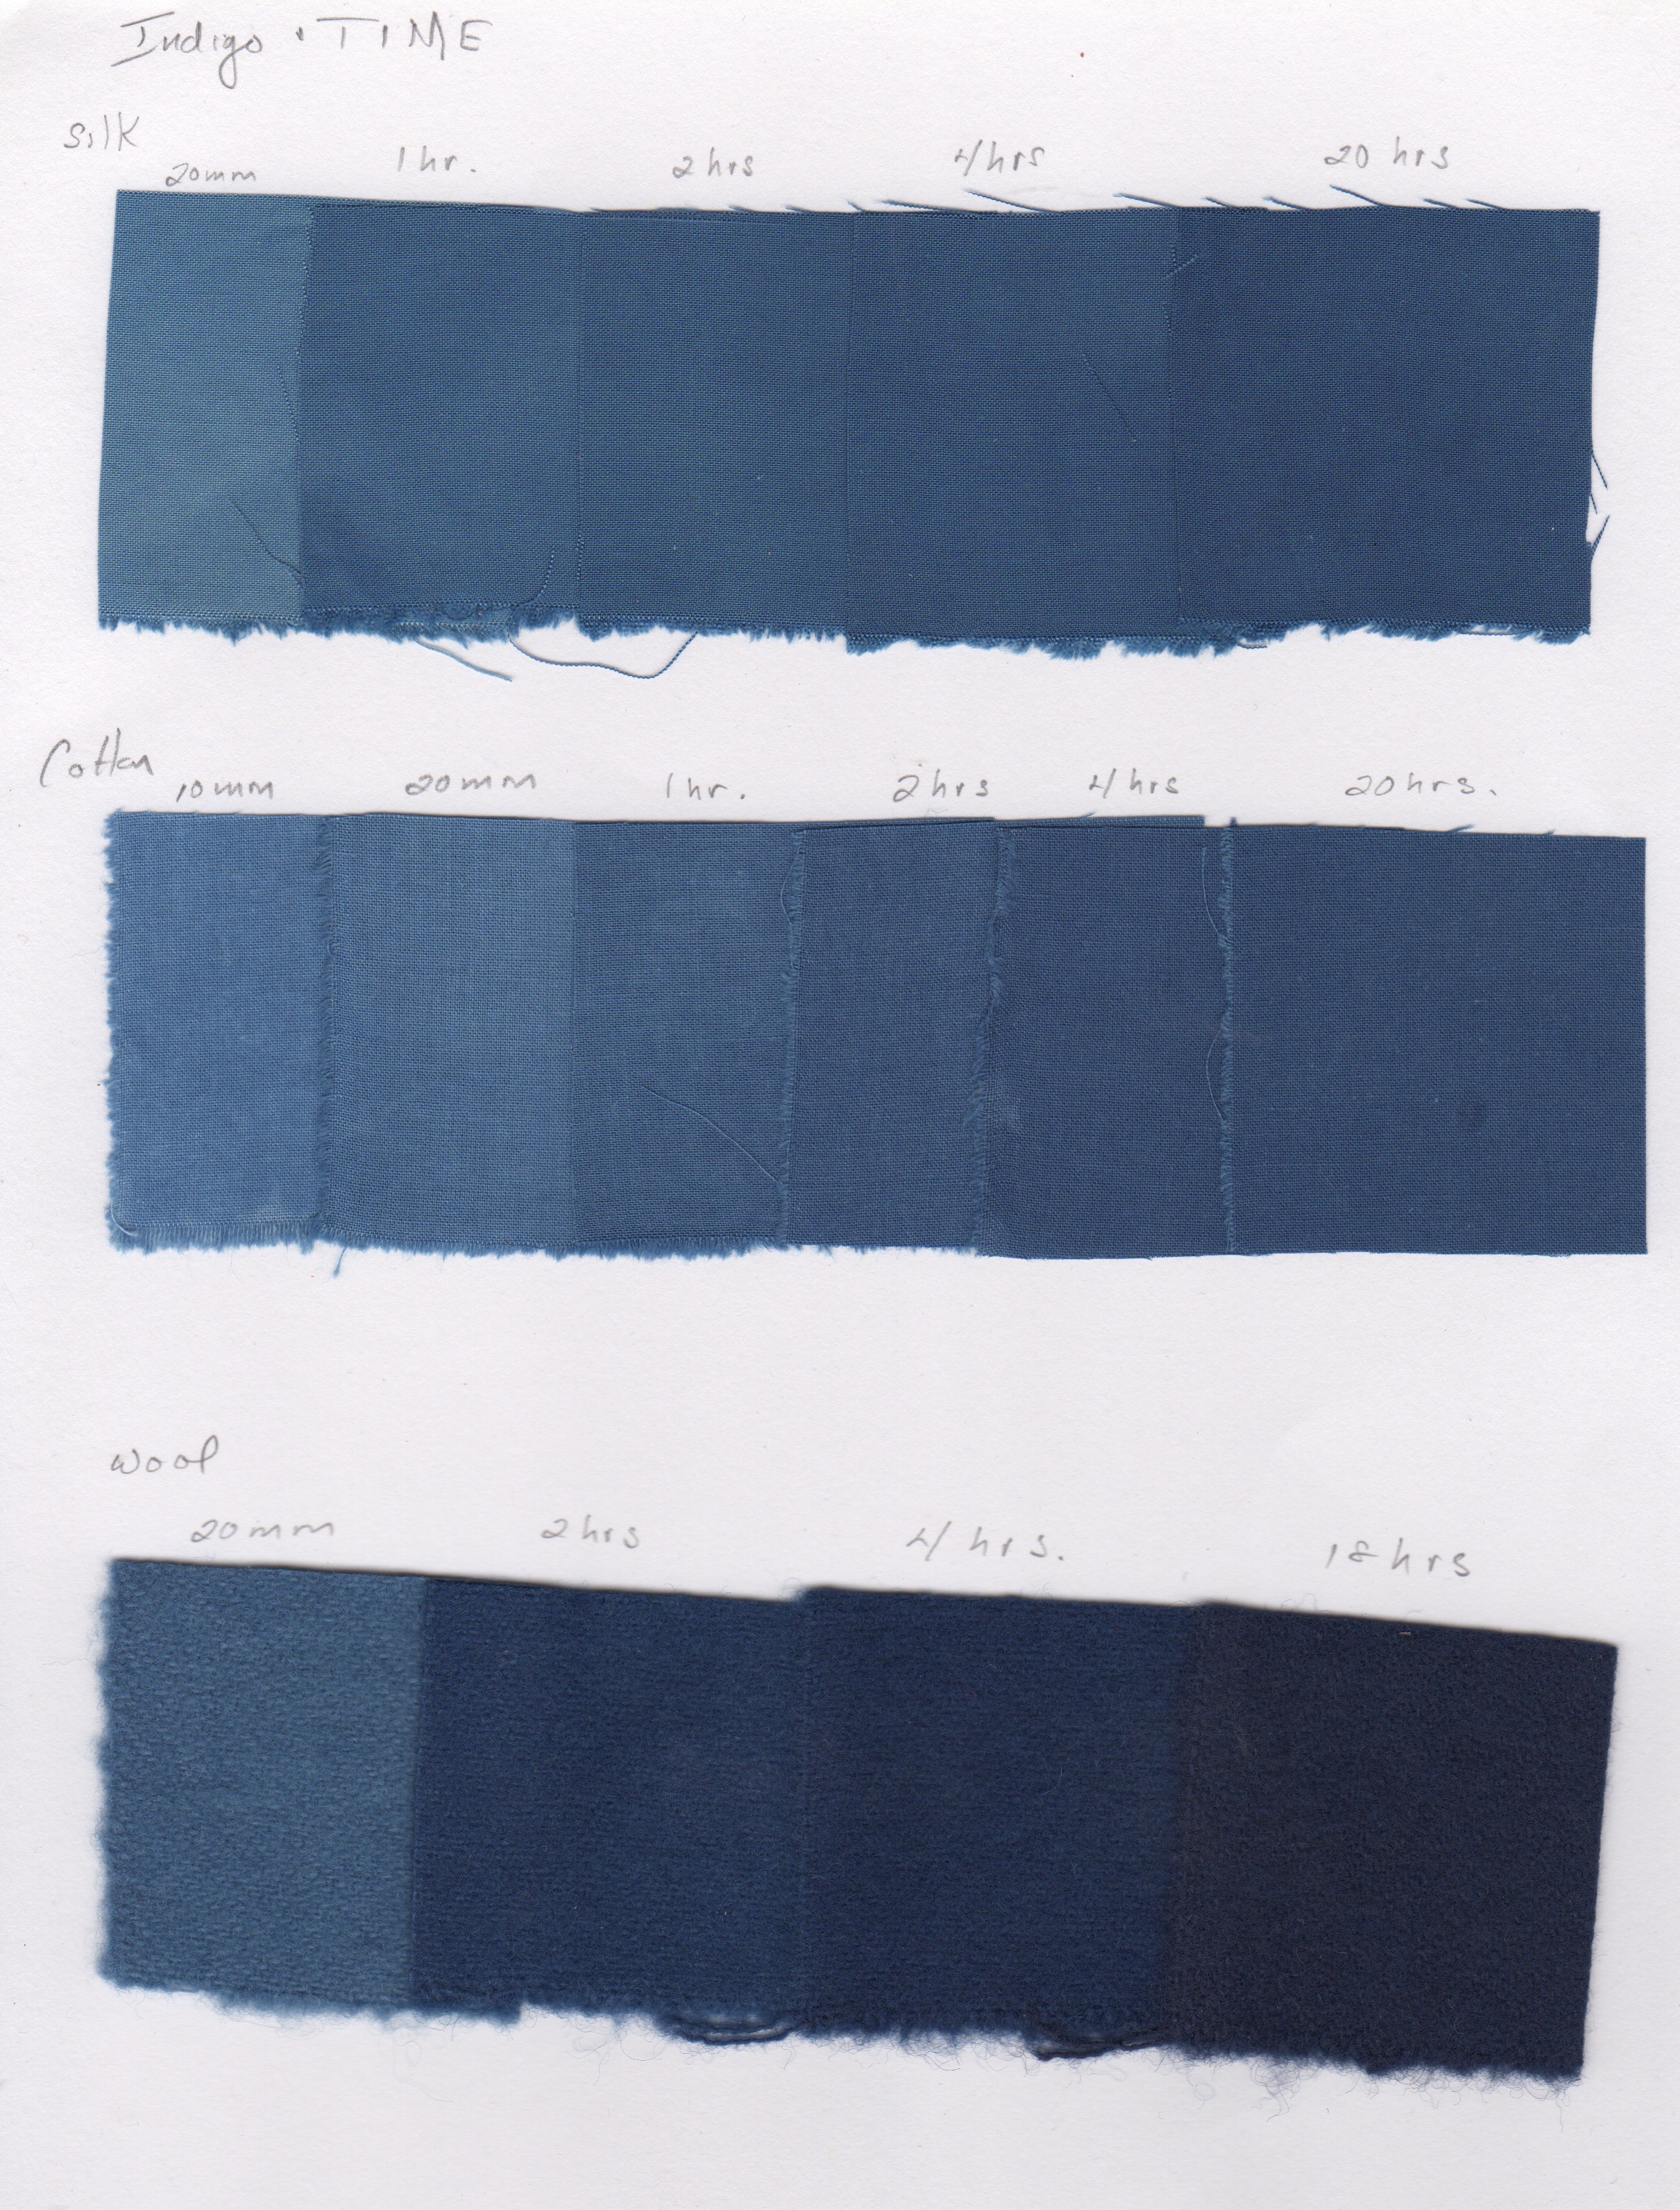 Three different test swatches from the SAME dye bath, using RIT